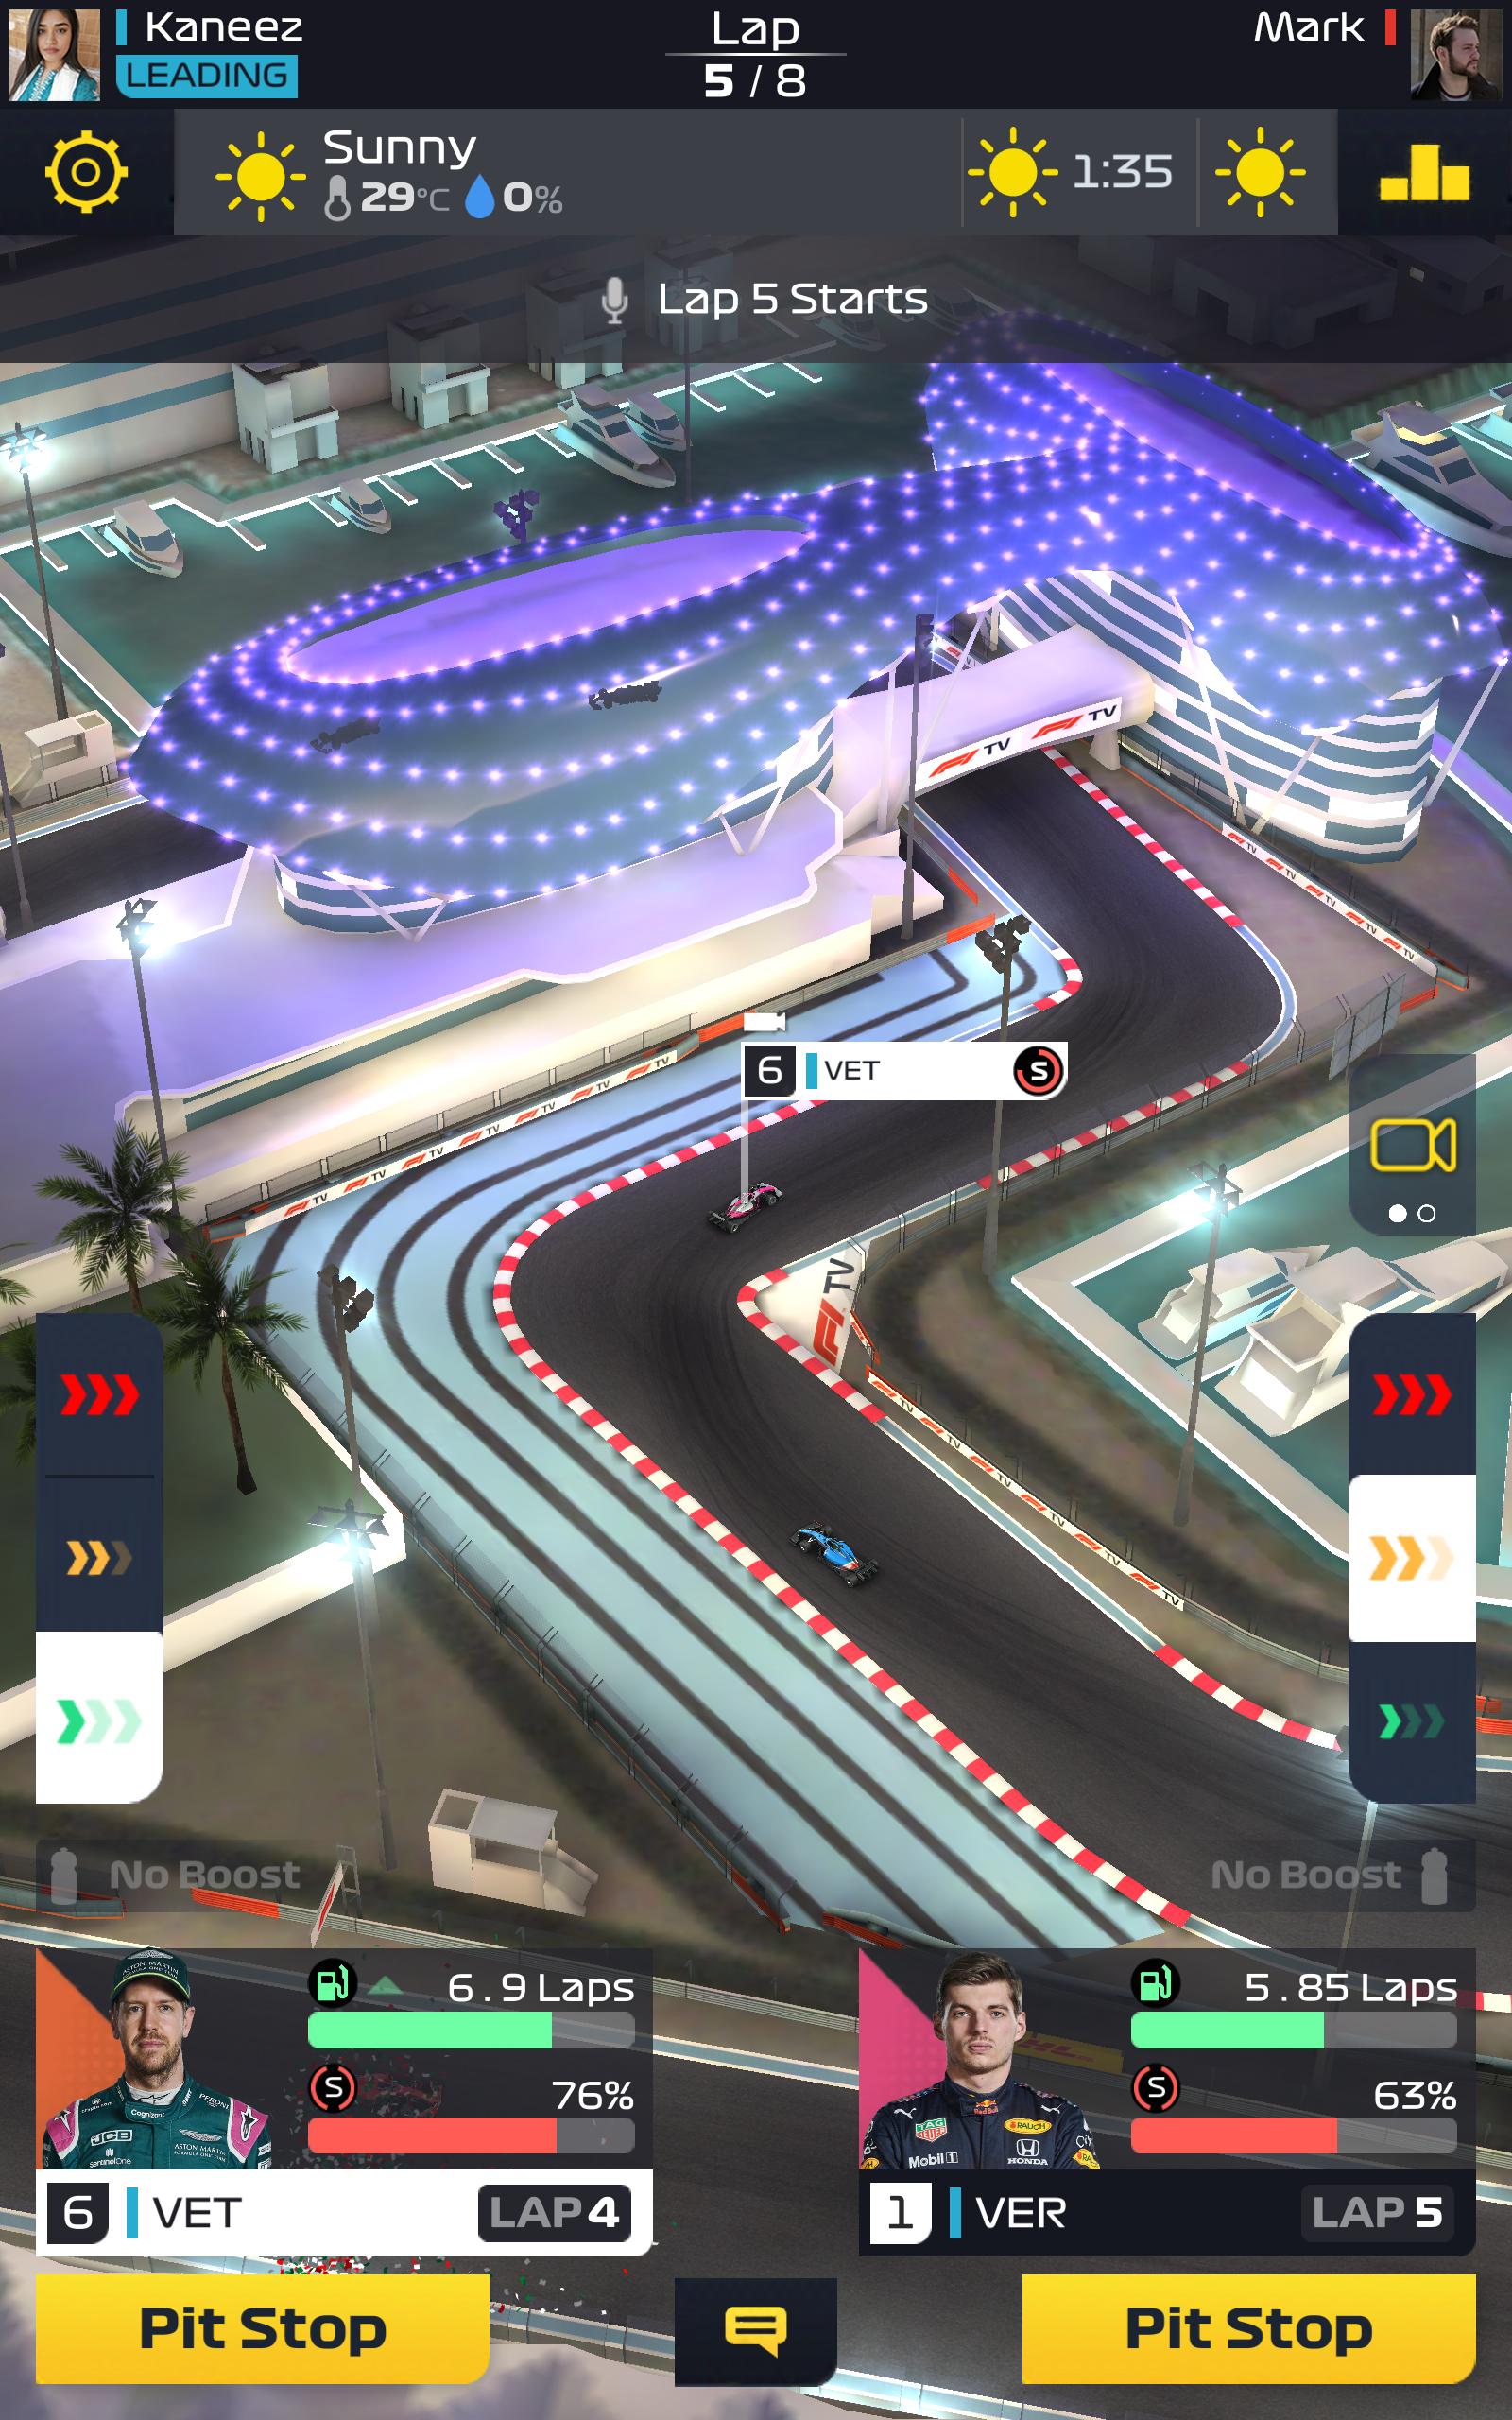 Best F1 games on mobile Can you beat Max Verstappen to the finish?